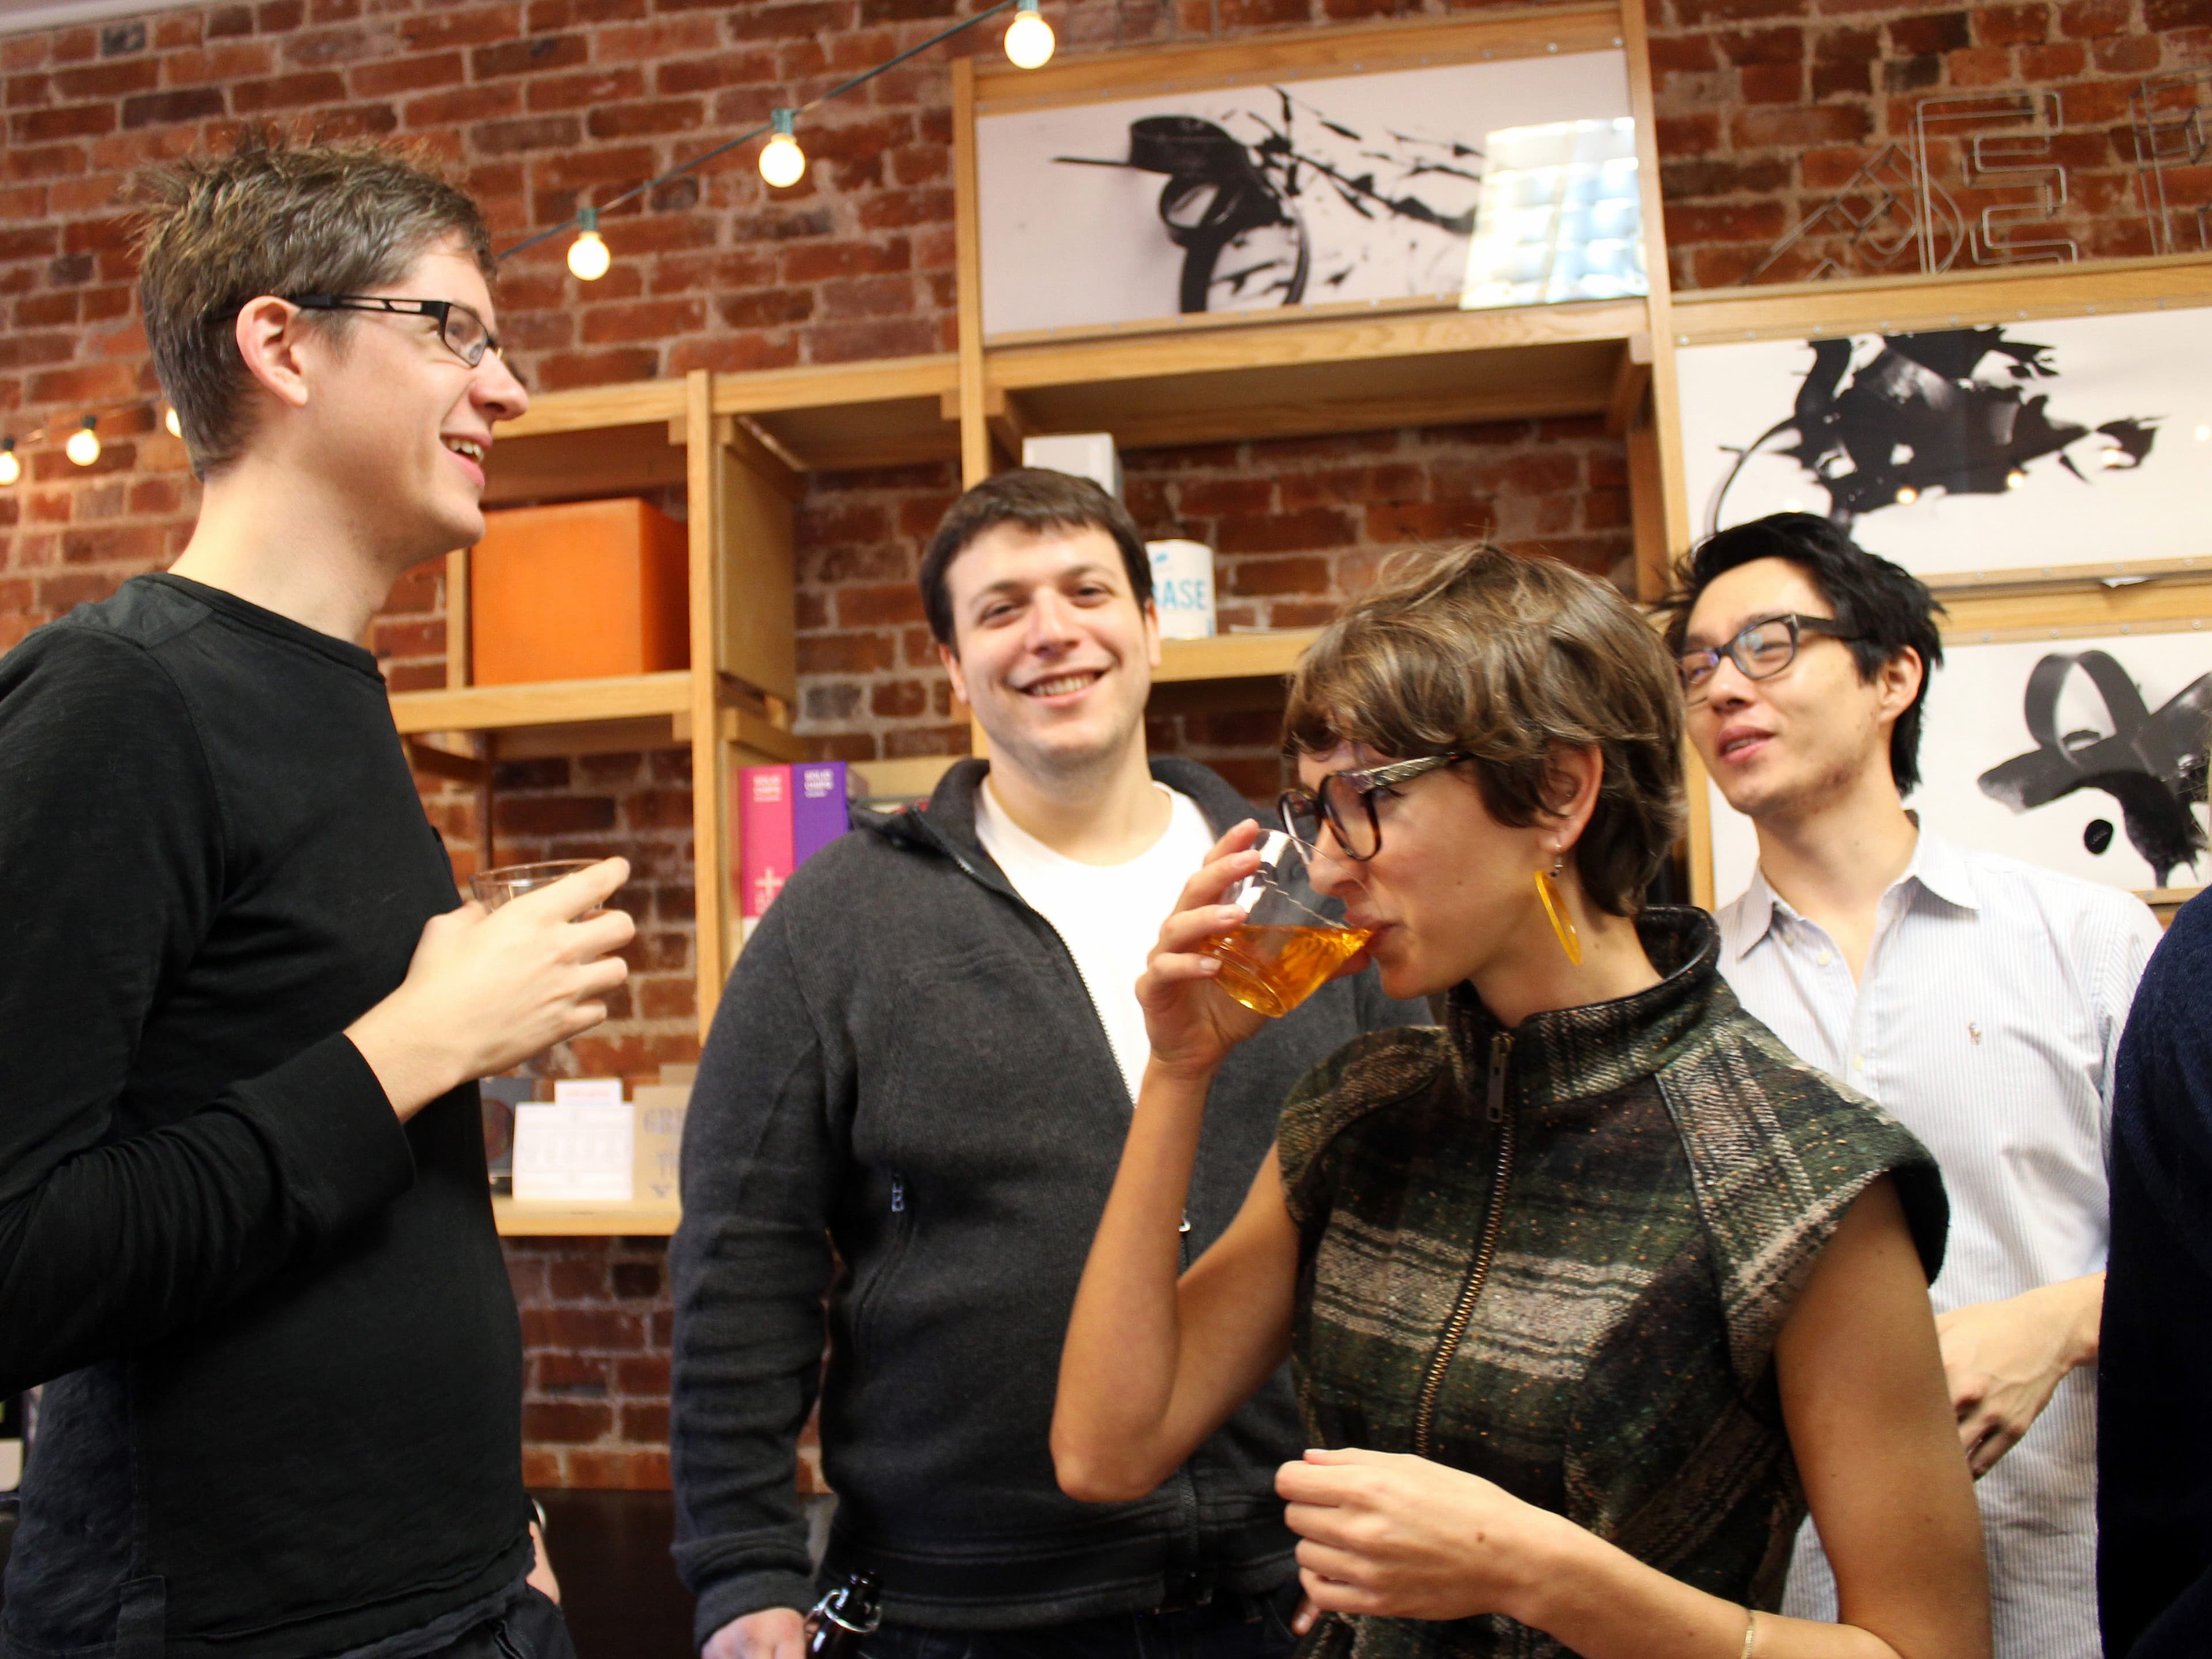 A group of four people are socializing in an indoor space with brick walls. One person is drinking from a glass, while the others are engaged in conversation. Shelves with various items and art hang on the wall behind them, and string lights add a cozy ambiance.